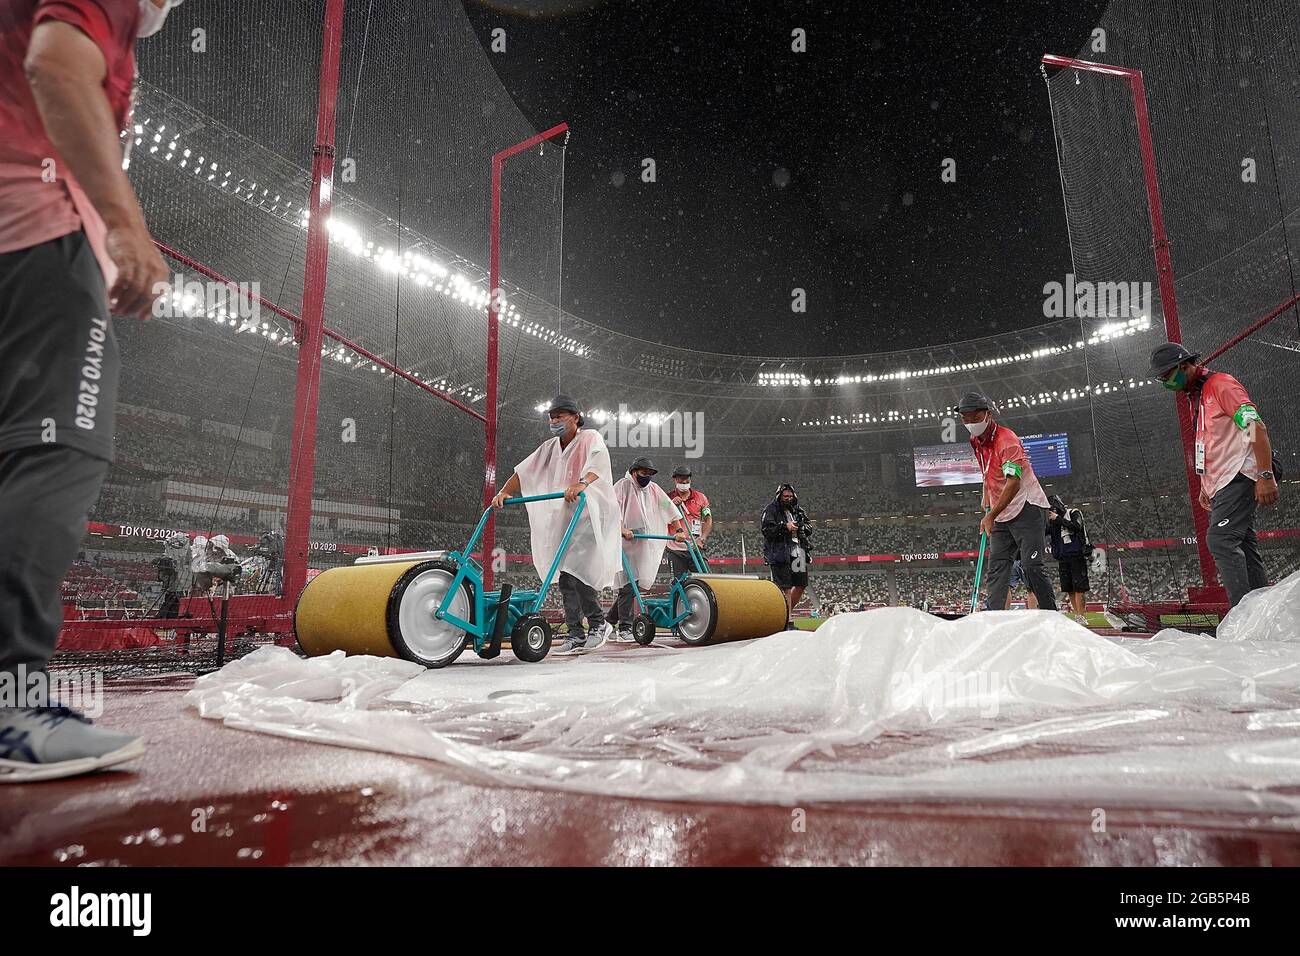 Tokyo, Japan. 2nd Aug, 2021. Staff members clean the court for the women's discus throw final at Tokyo 2020 Olympic Games, in Tokyo, Japan, Aug. 2, 2021. Credit: Wang Lili/Xinhua/Alamy Live News Stock Photo